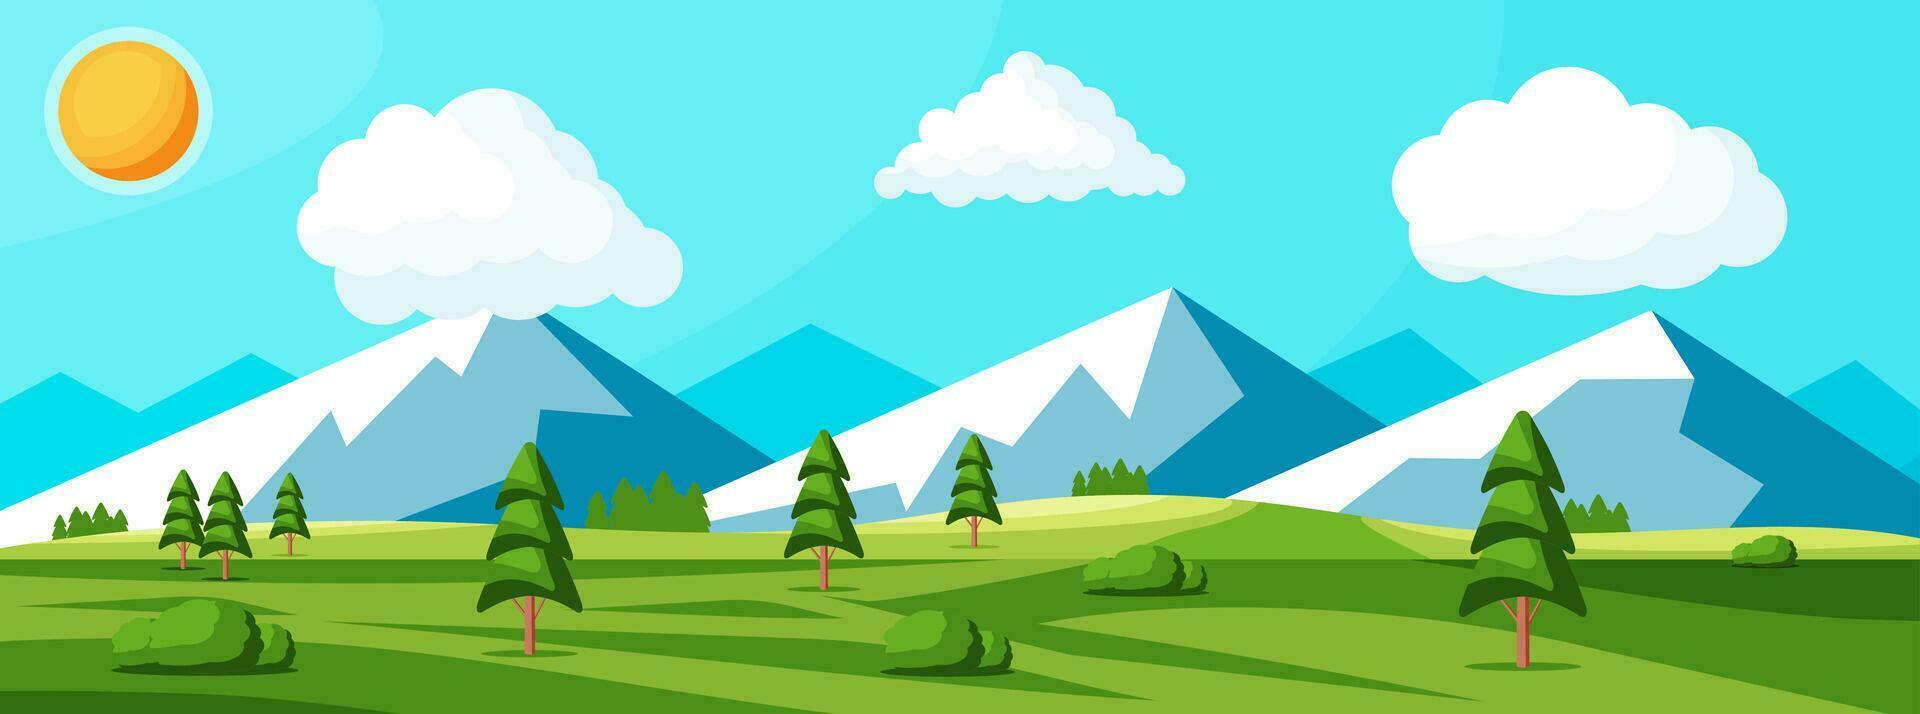 Landscape Of Mountains And Green Hills. Summer Nature Landscape With Rocks, Forest, Grass, Sun, Sky and Clouds. National Park or Nature Reserve. Vector Illustration In Flat Style